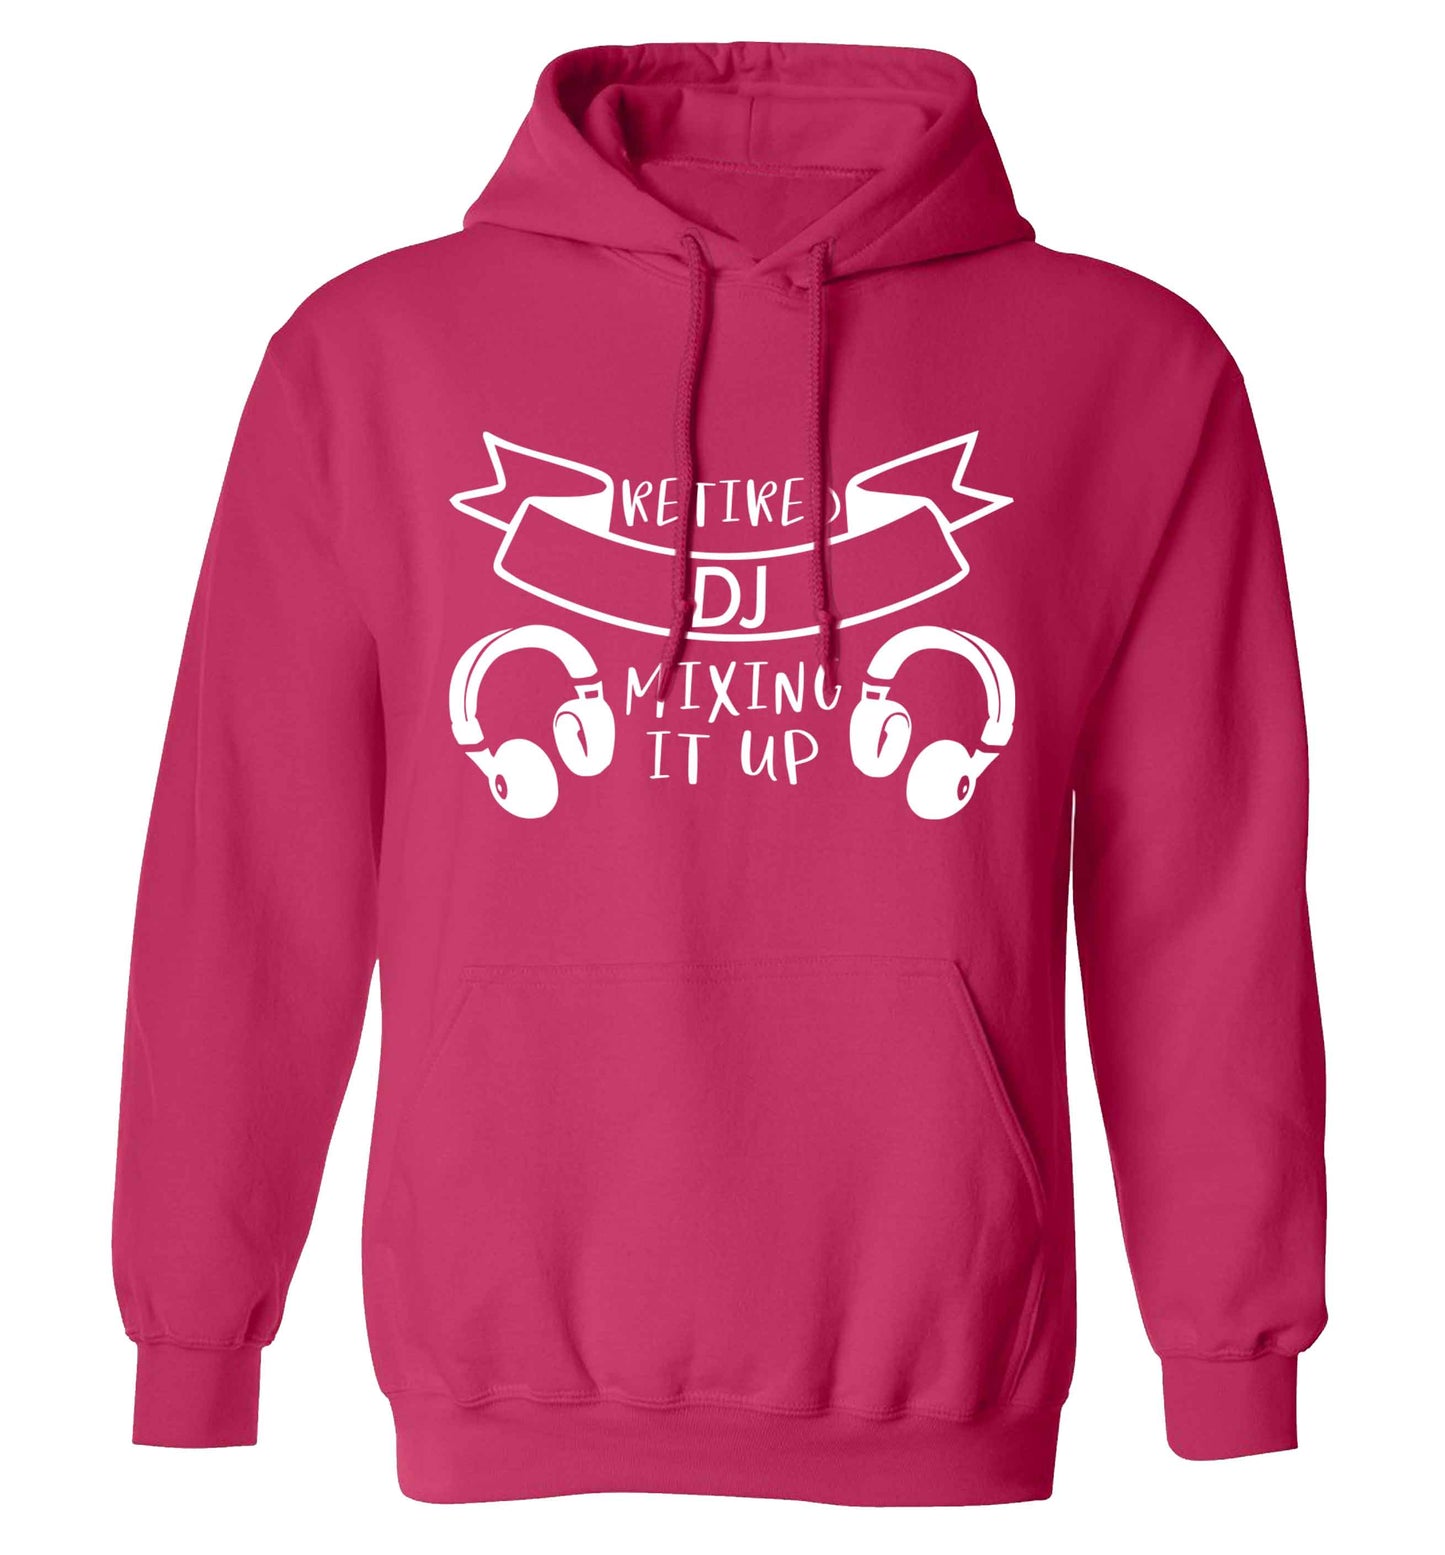 Retired DJ mixing it up adults unisex pink hoodie 2XL